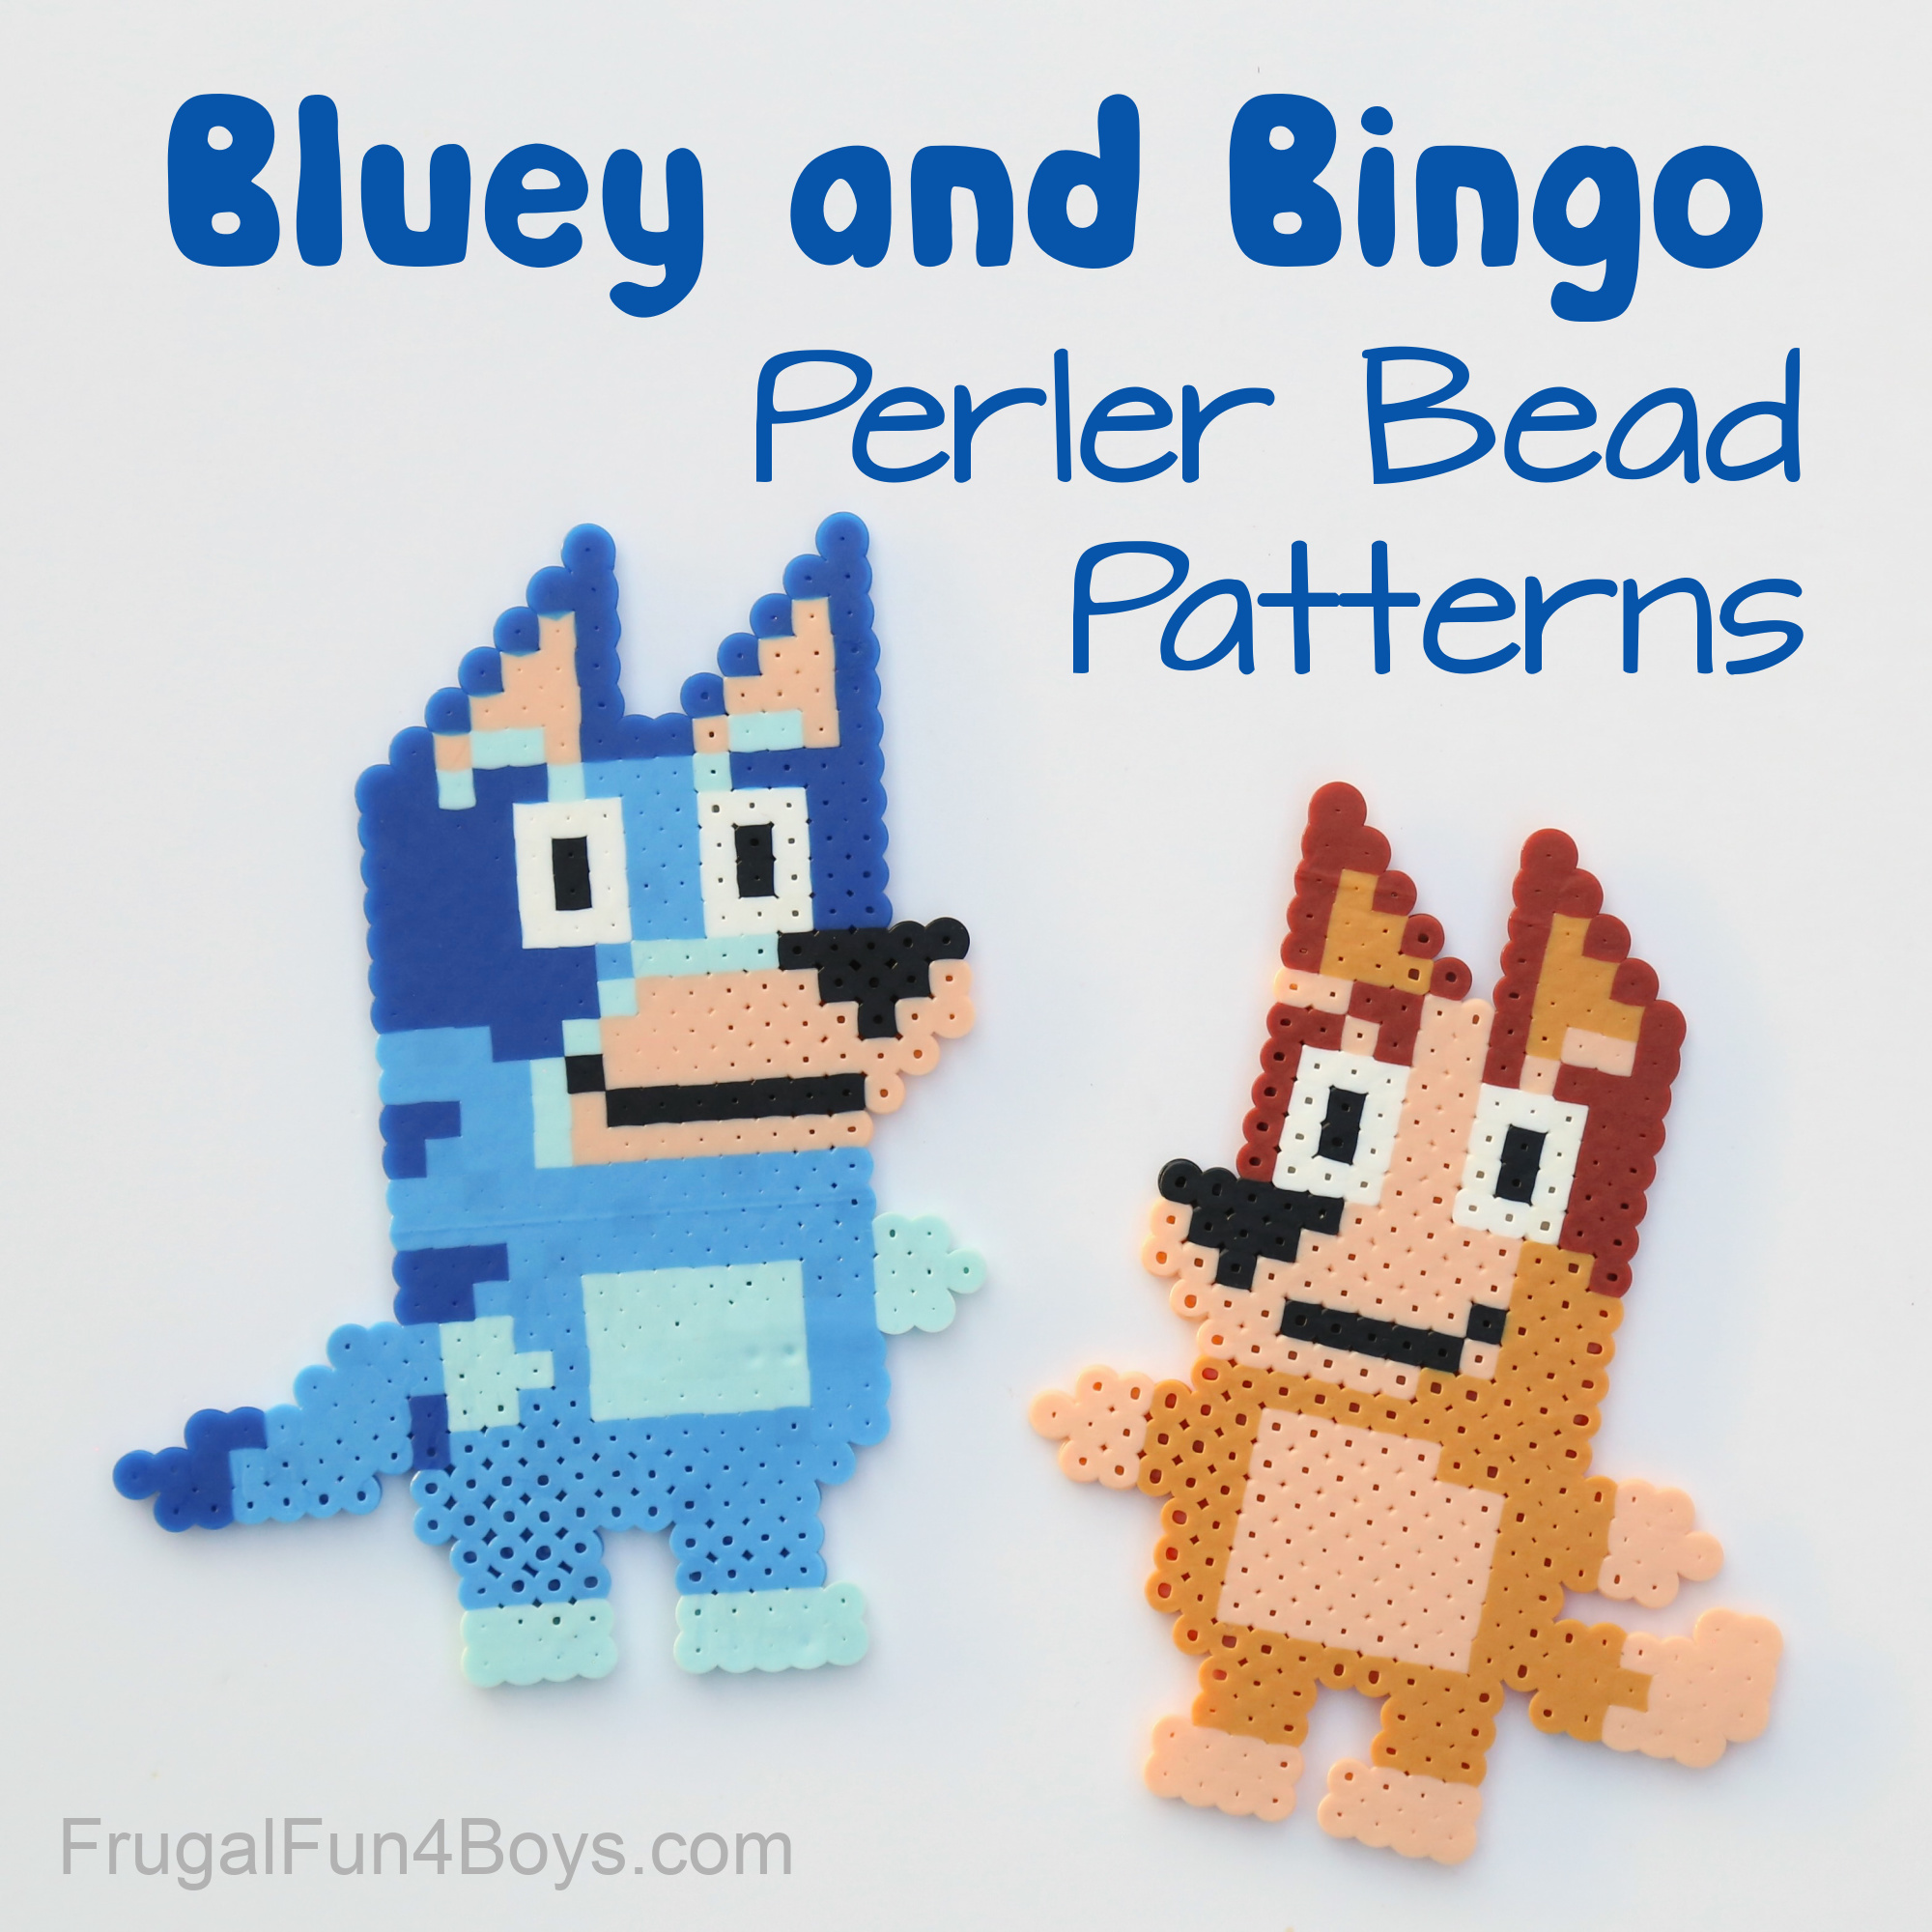 Bluey and Bingo Perler Bead Patterns - Frugal Fun For Boys and Girls